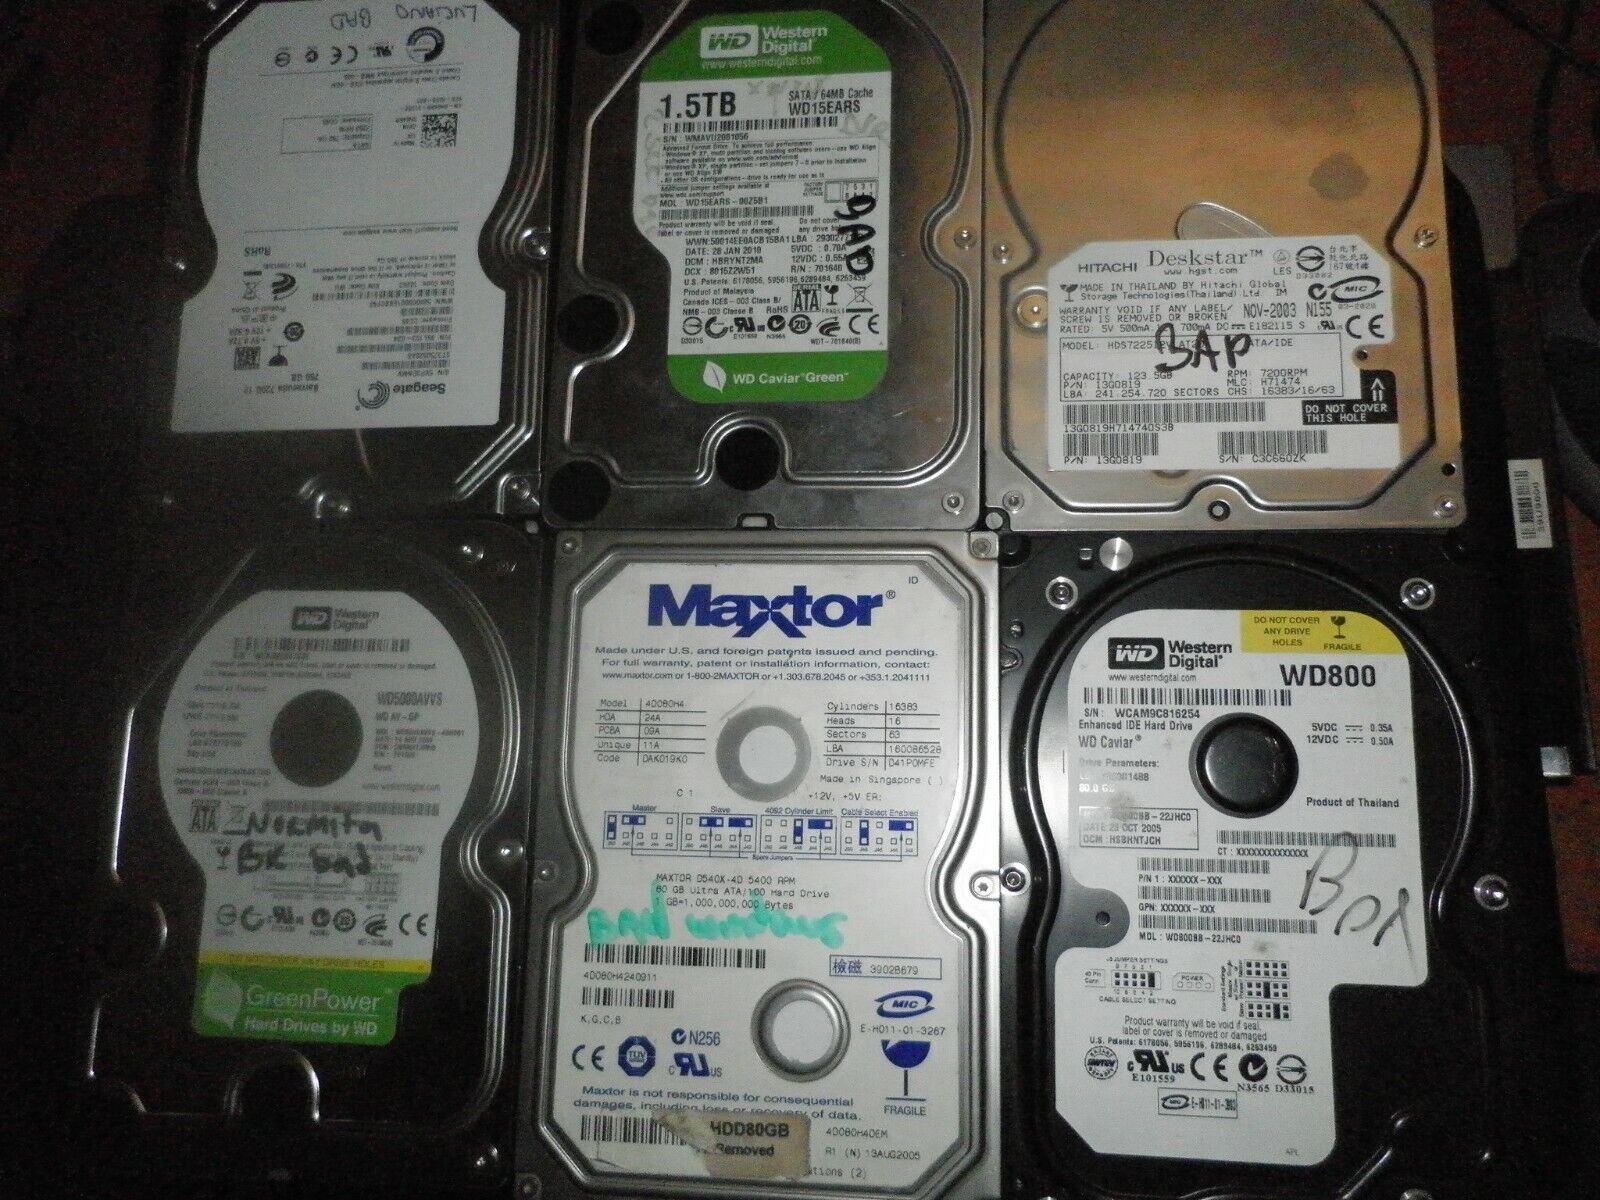 Lot of 6 bad hdd 3.5 (3 IDE and 3 SATA) for parts/recycling